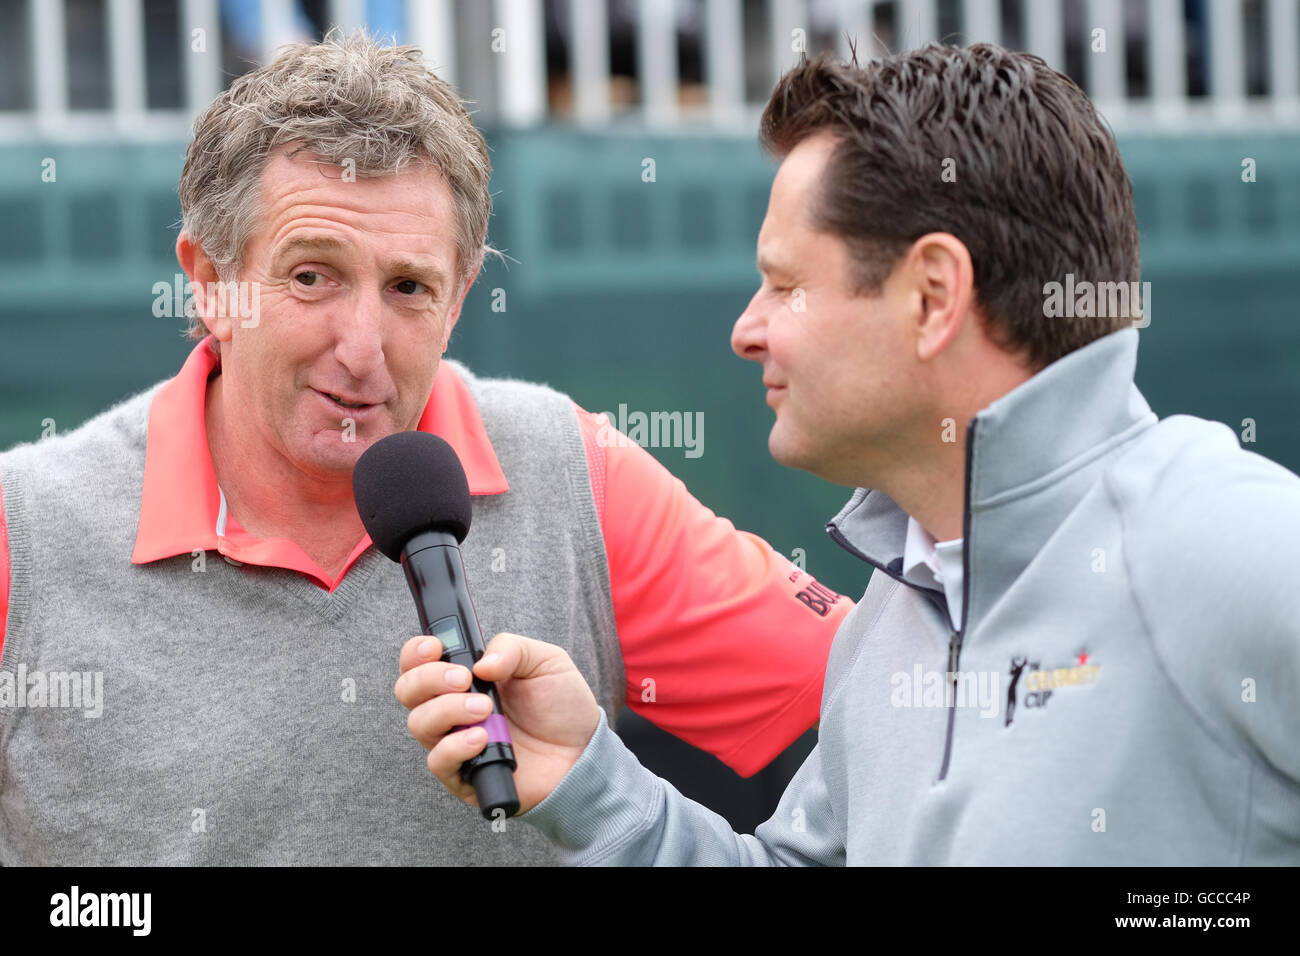 Celtic Manor, Newport, Wales - Saturday 9th July 2016 - The Celebrity Cup golf competition former international rugby player Jonathan Davies talks to host Chris Hollins Stock Photo